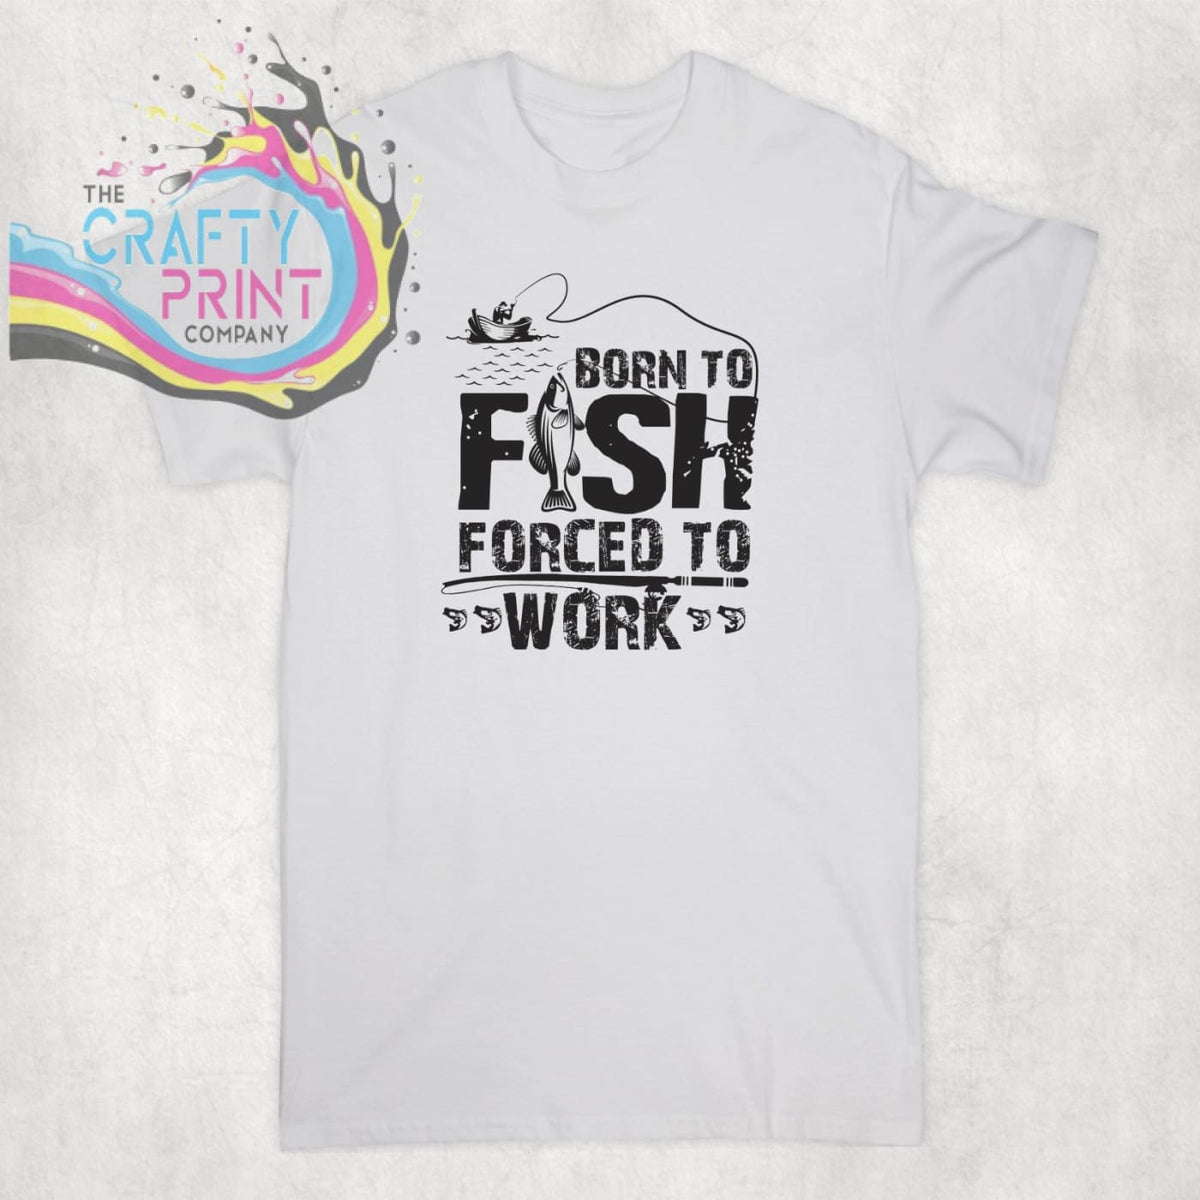 Born To Fish Forced to Work T-shirt – The Crafty Print Company